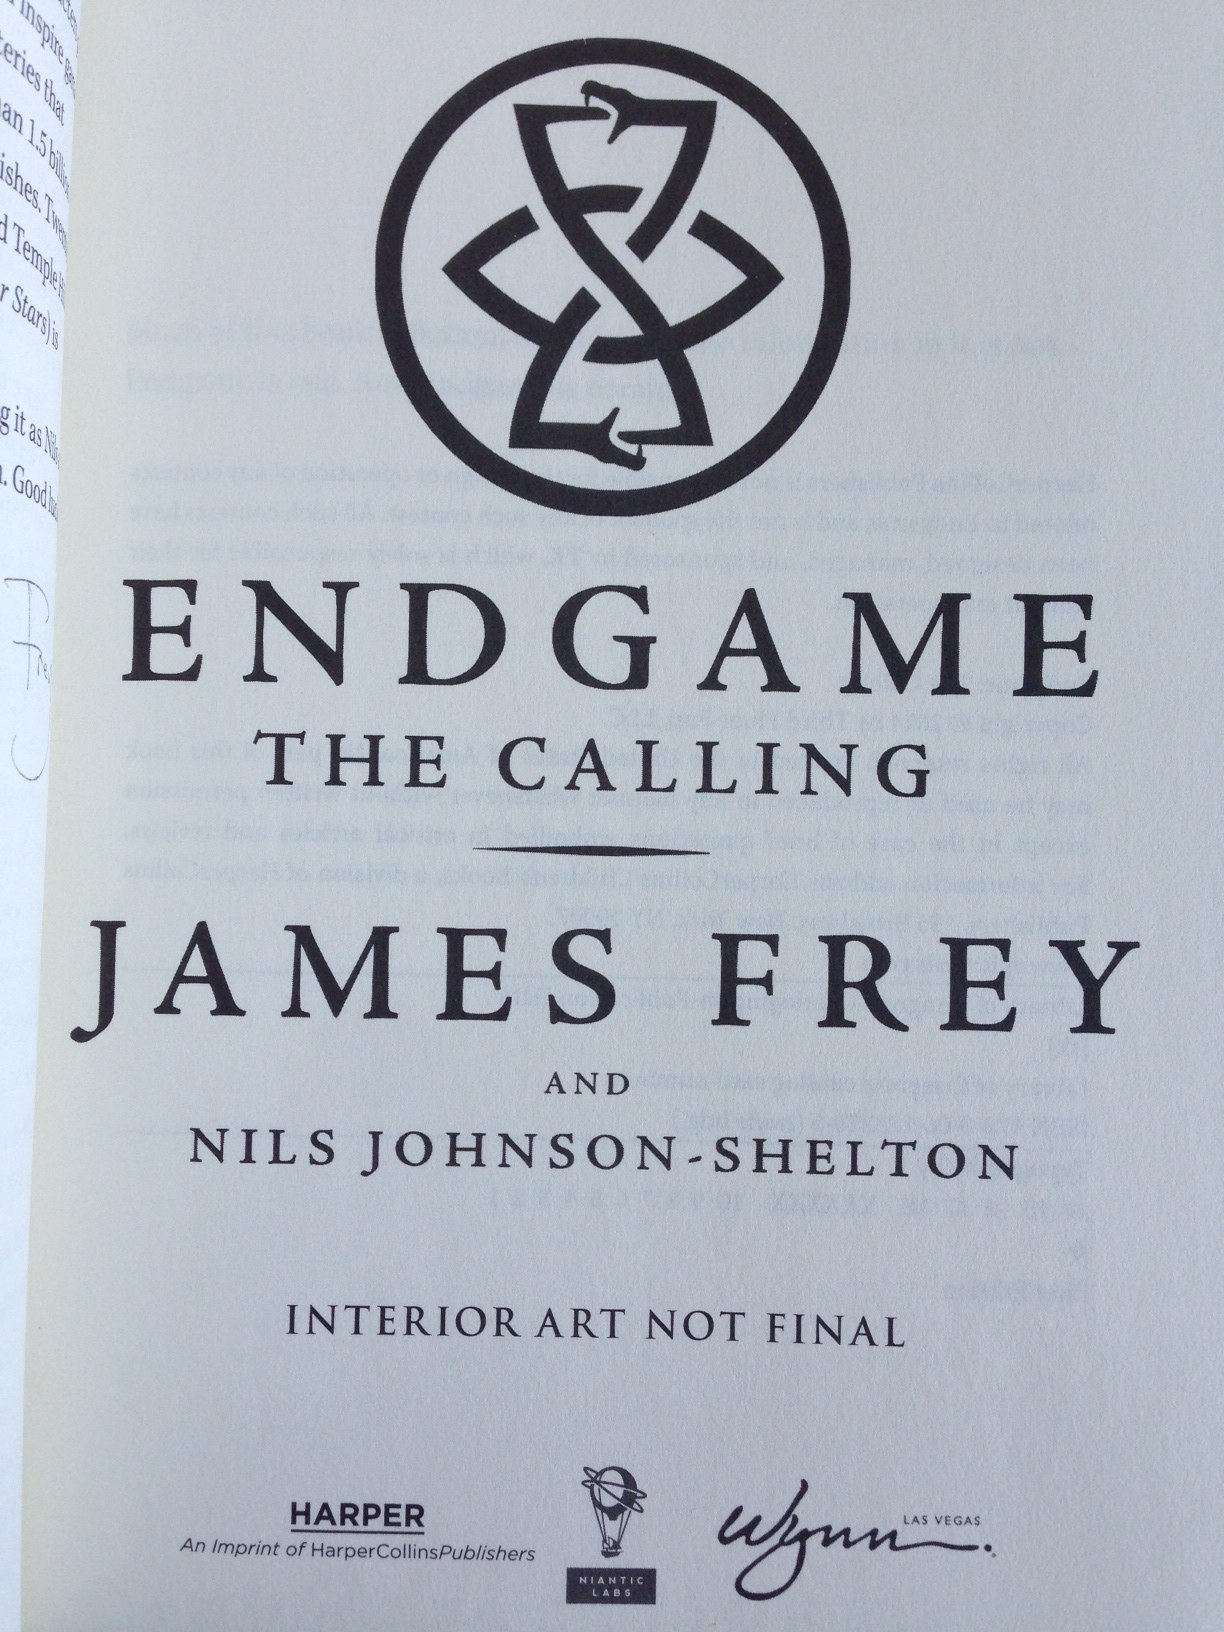 Endgame: Rules of the Game by James Frey, Nils Johnson-Shelton - Audiobook  